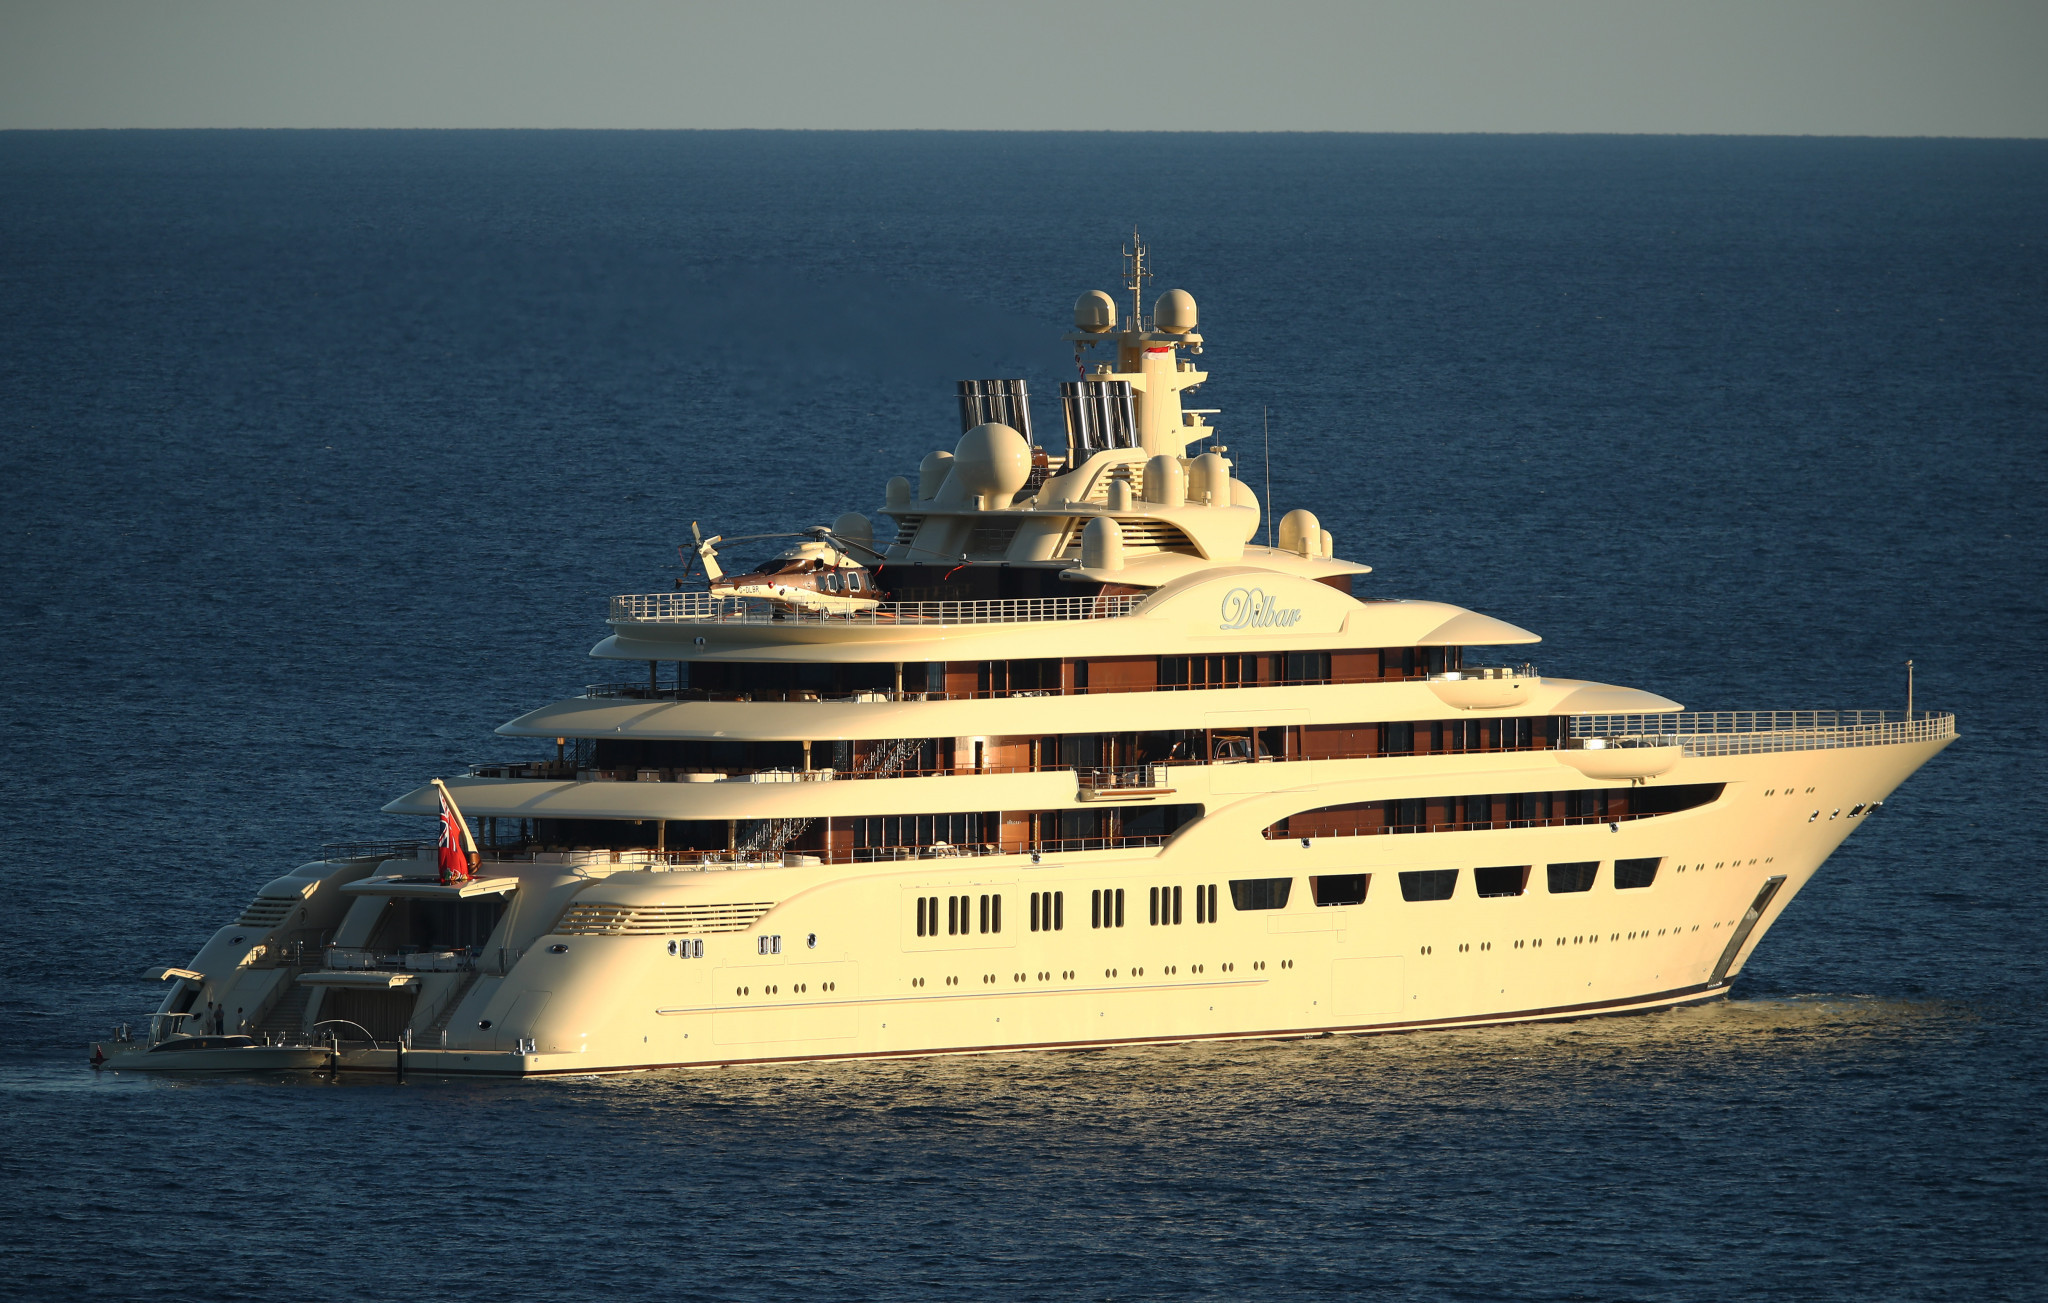 FIE President Alisher Usmanov owns the world's sixth-longest yacht - pictured in 2017 ©Getty Images